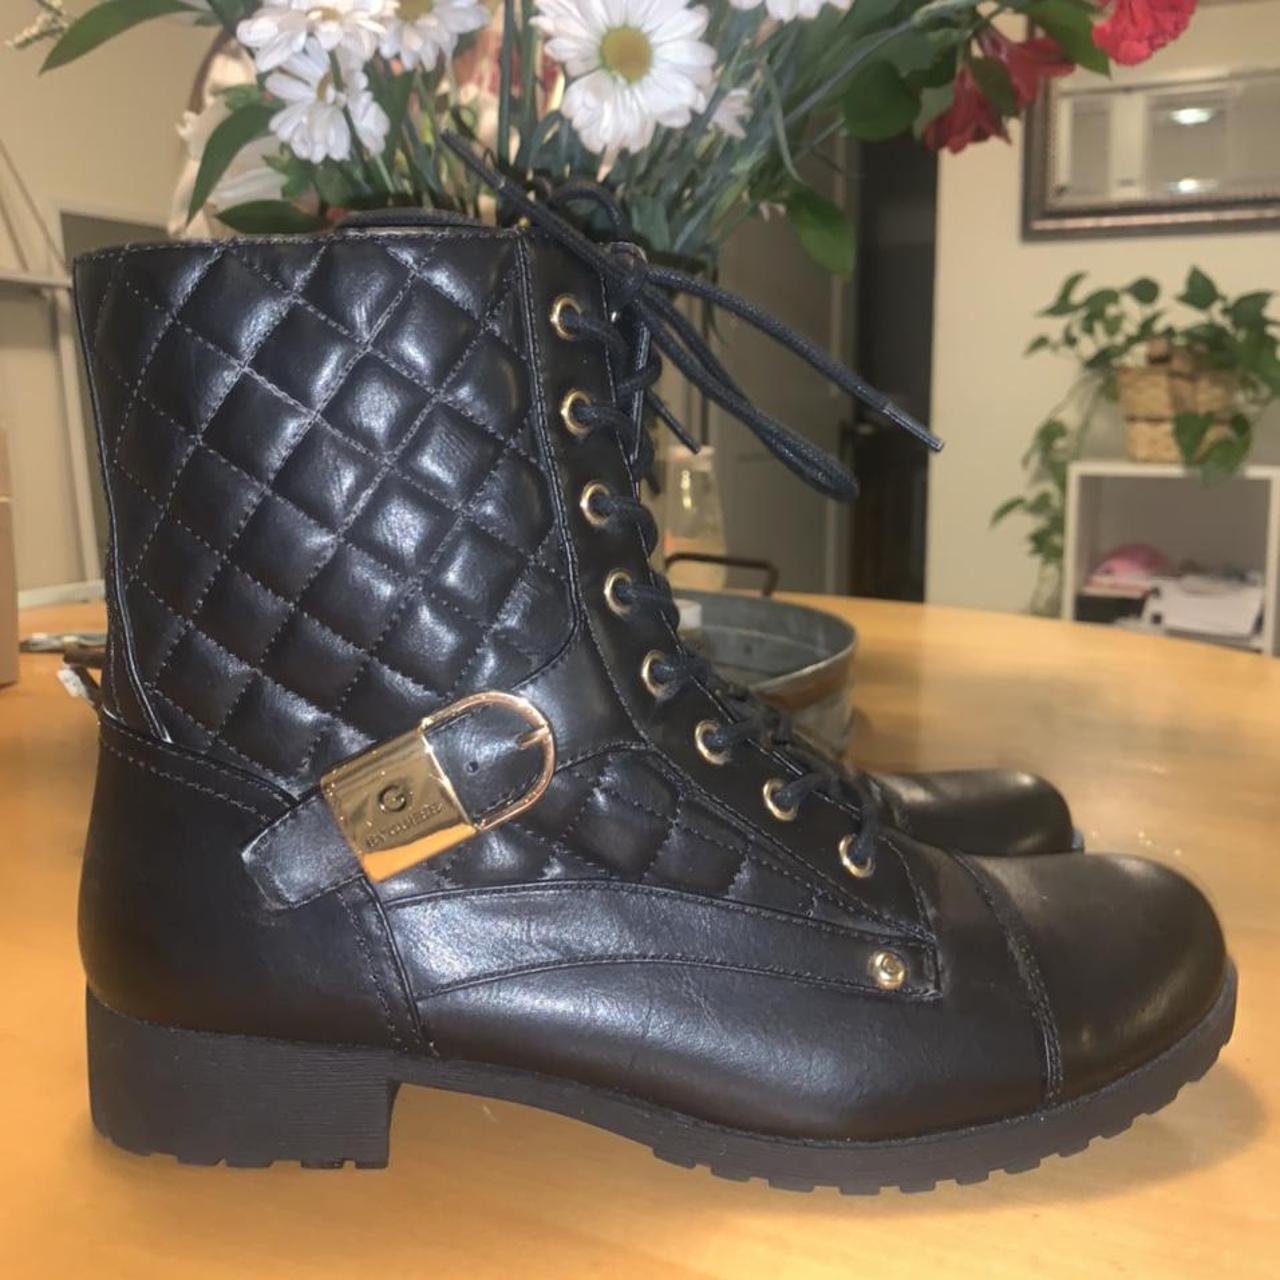 GUESS COMBAT BOOTS Black lace up with side zip 1... - Depop